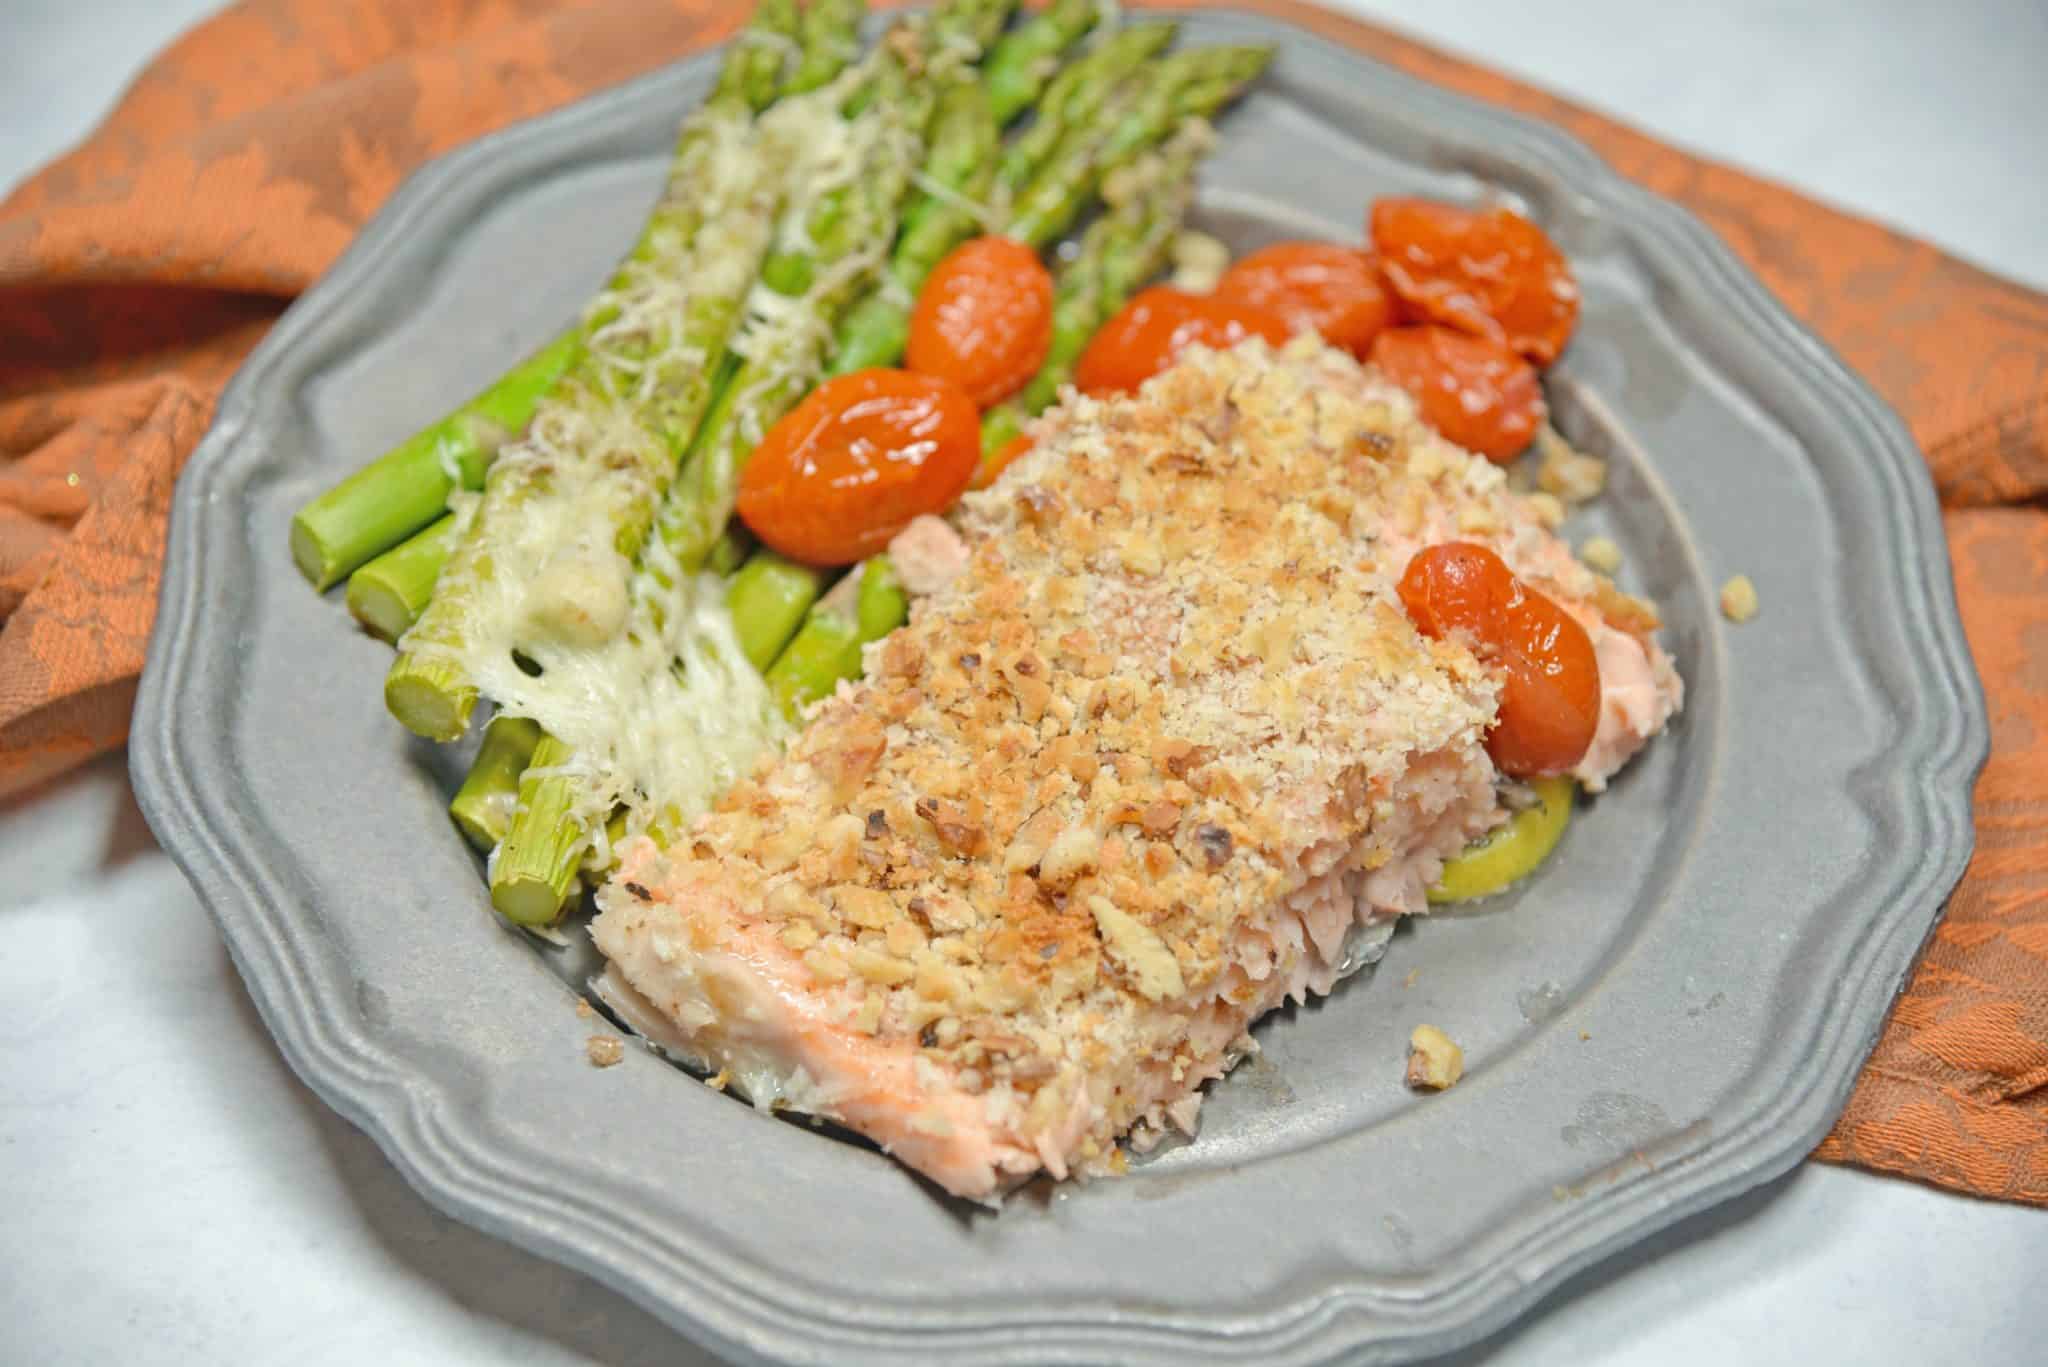 Sheet Pan Crispy Salmon is a fast, easy and healthy weeknight meal. Prep this sheet pan meal in just 5 minutes using tomatoes, asparagus and a crispy panko and walnut topping for you salmon.